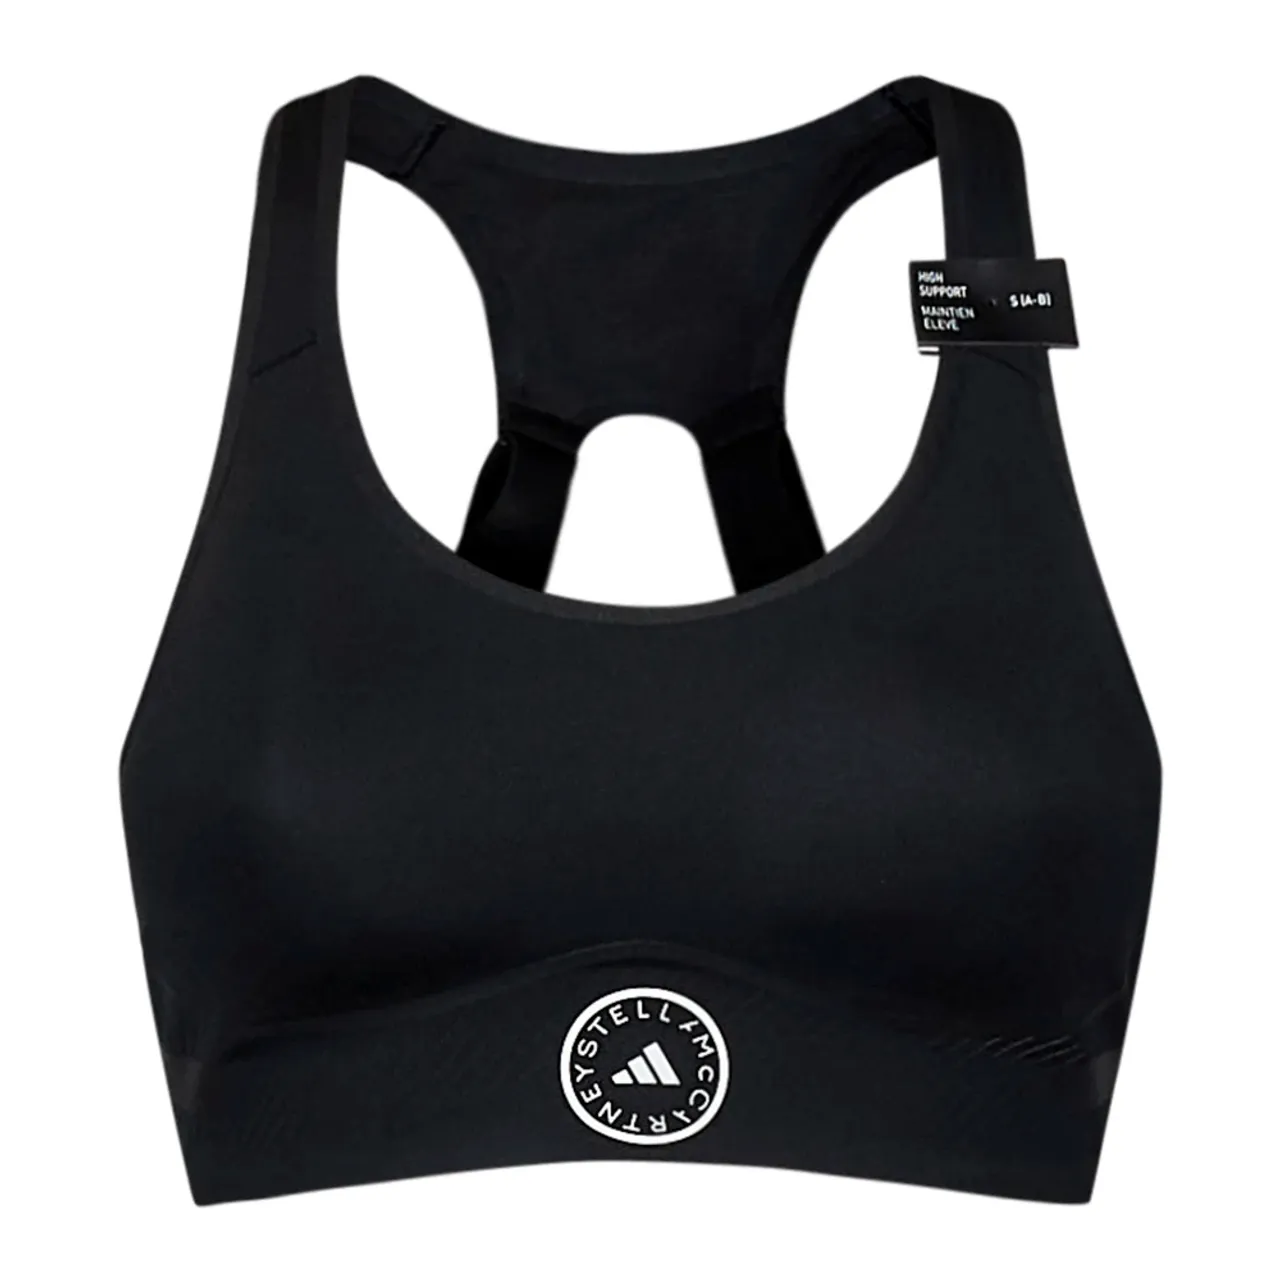 Adidas by Stella McCartney , Black Top with Adjustable Straps and Mesh Lining ,Black female, Sizes: